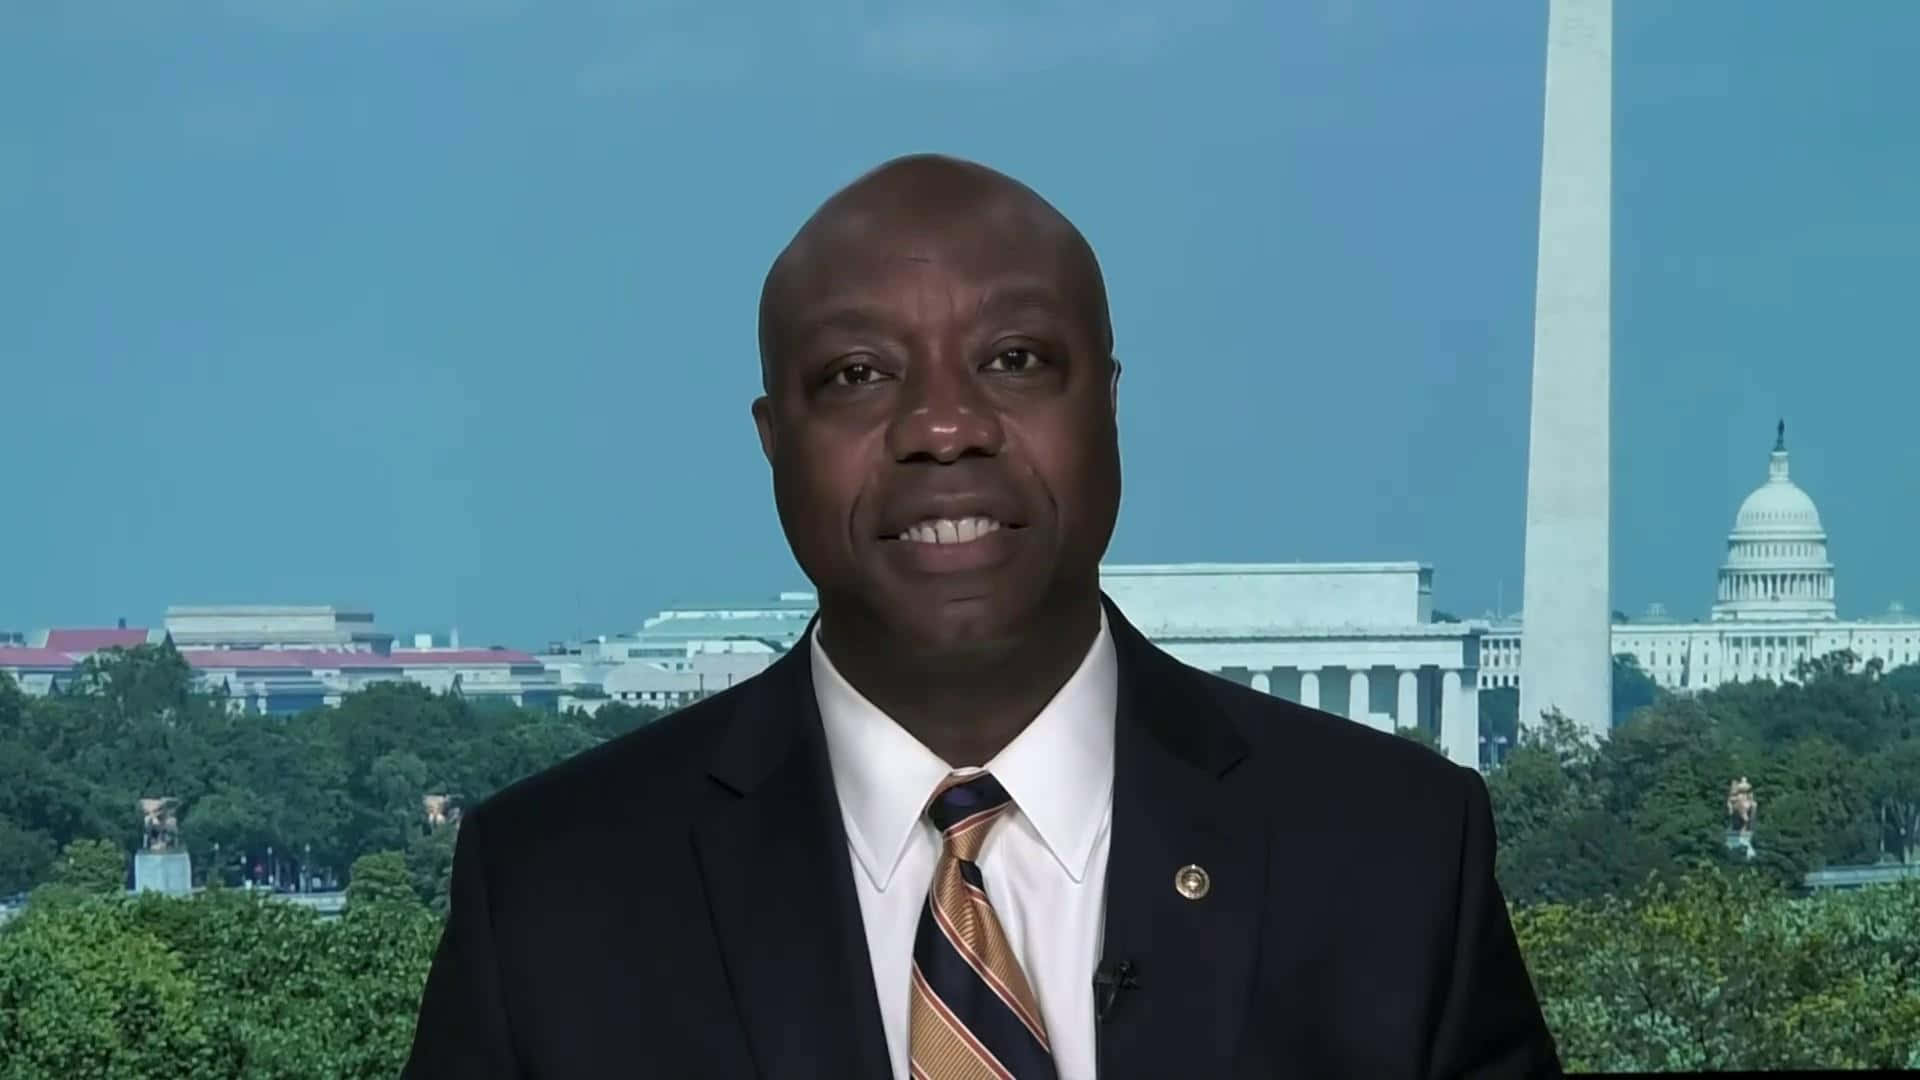 Tim Scott And The White House Background